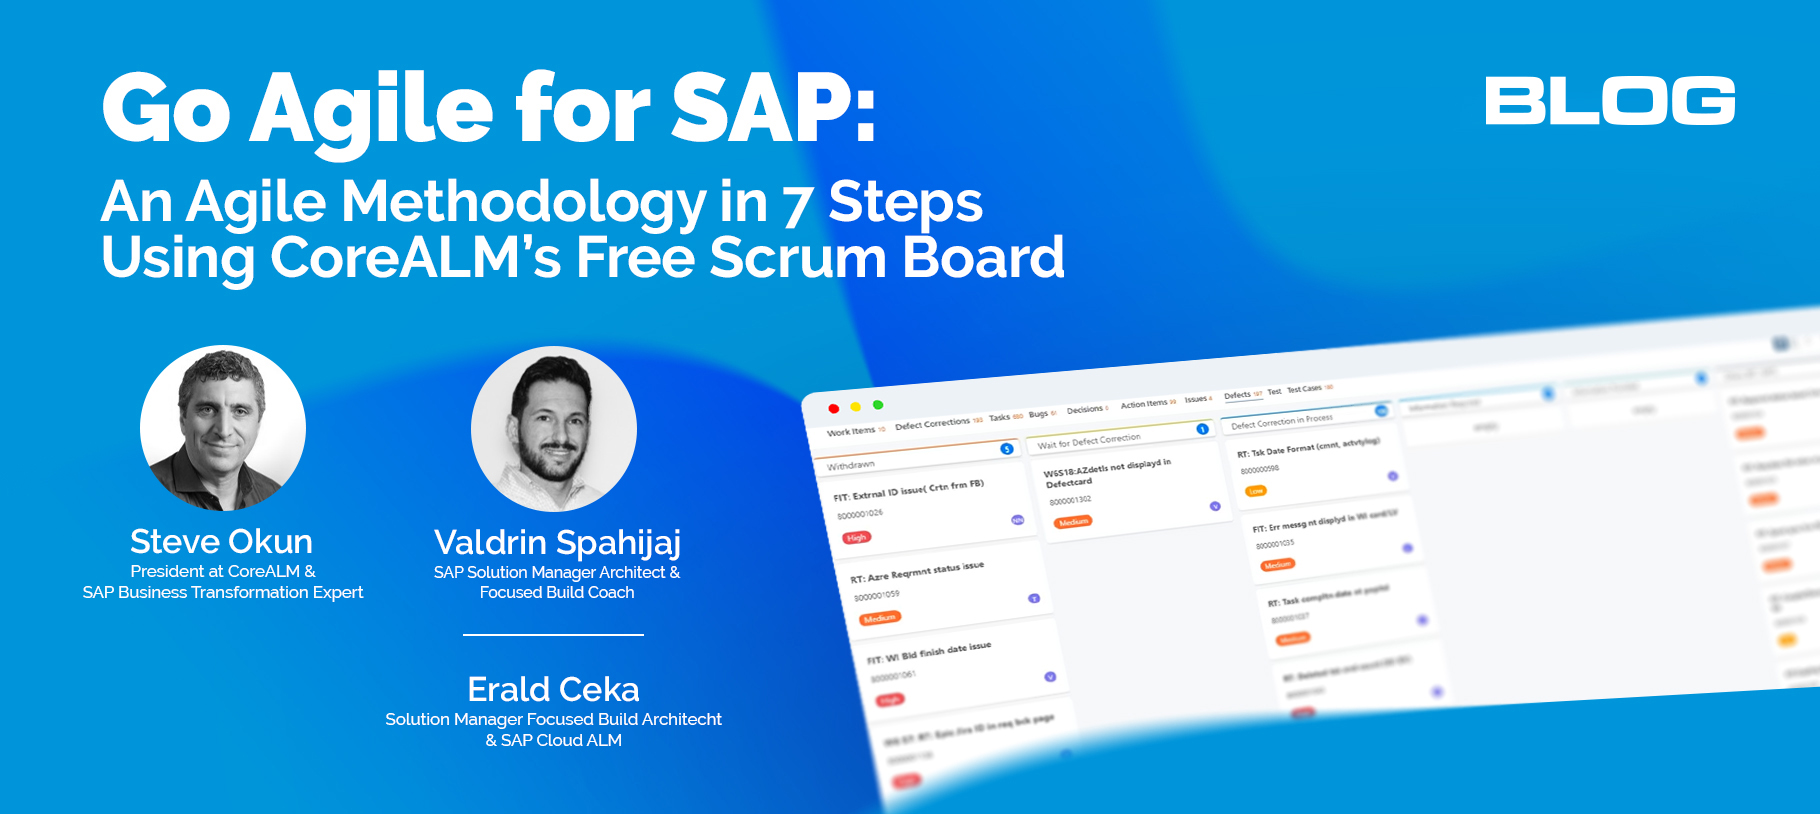 Go Agile For SAP: An Agile Methodology In 7 Steps Using CoreALM’s Free Scrum Board